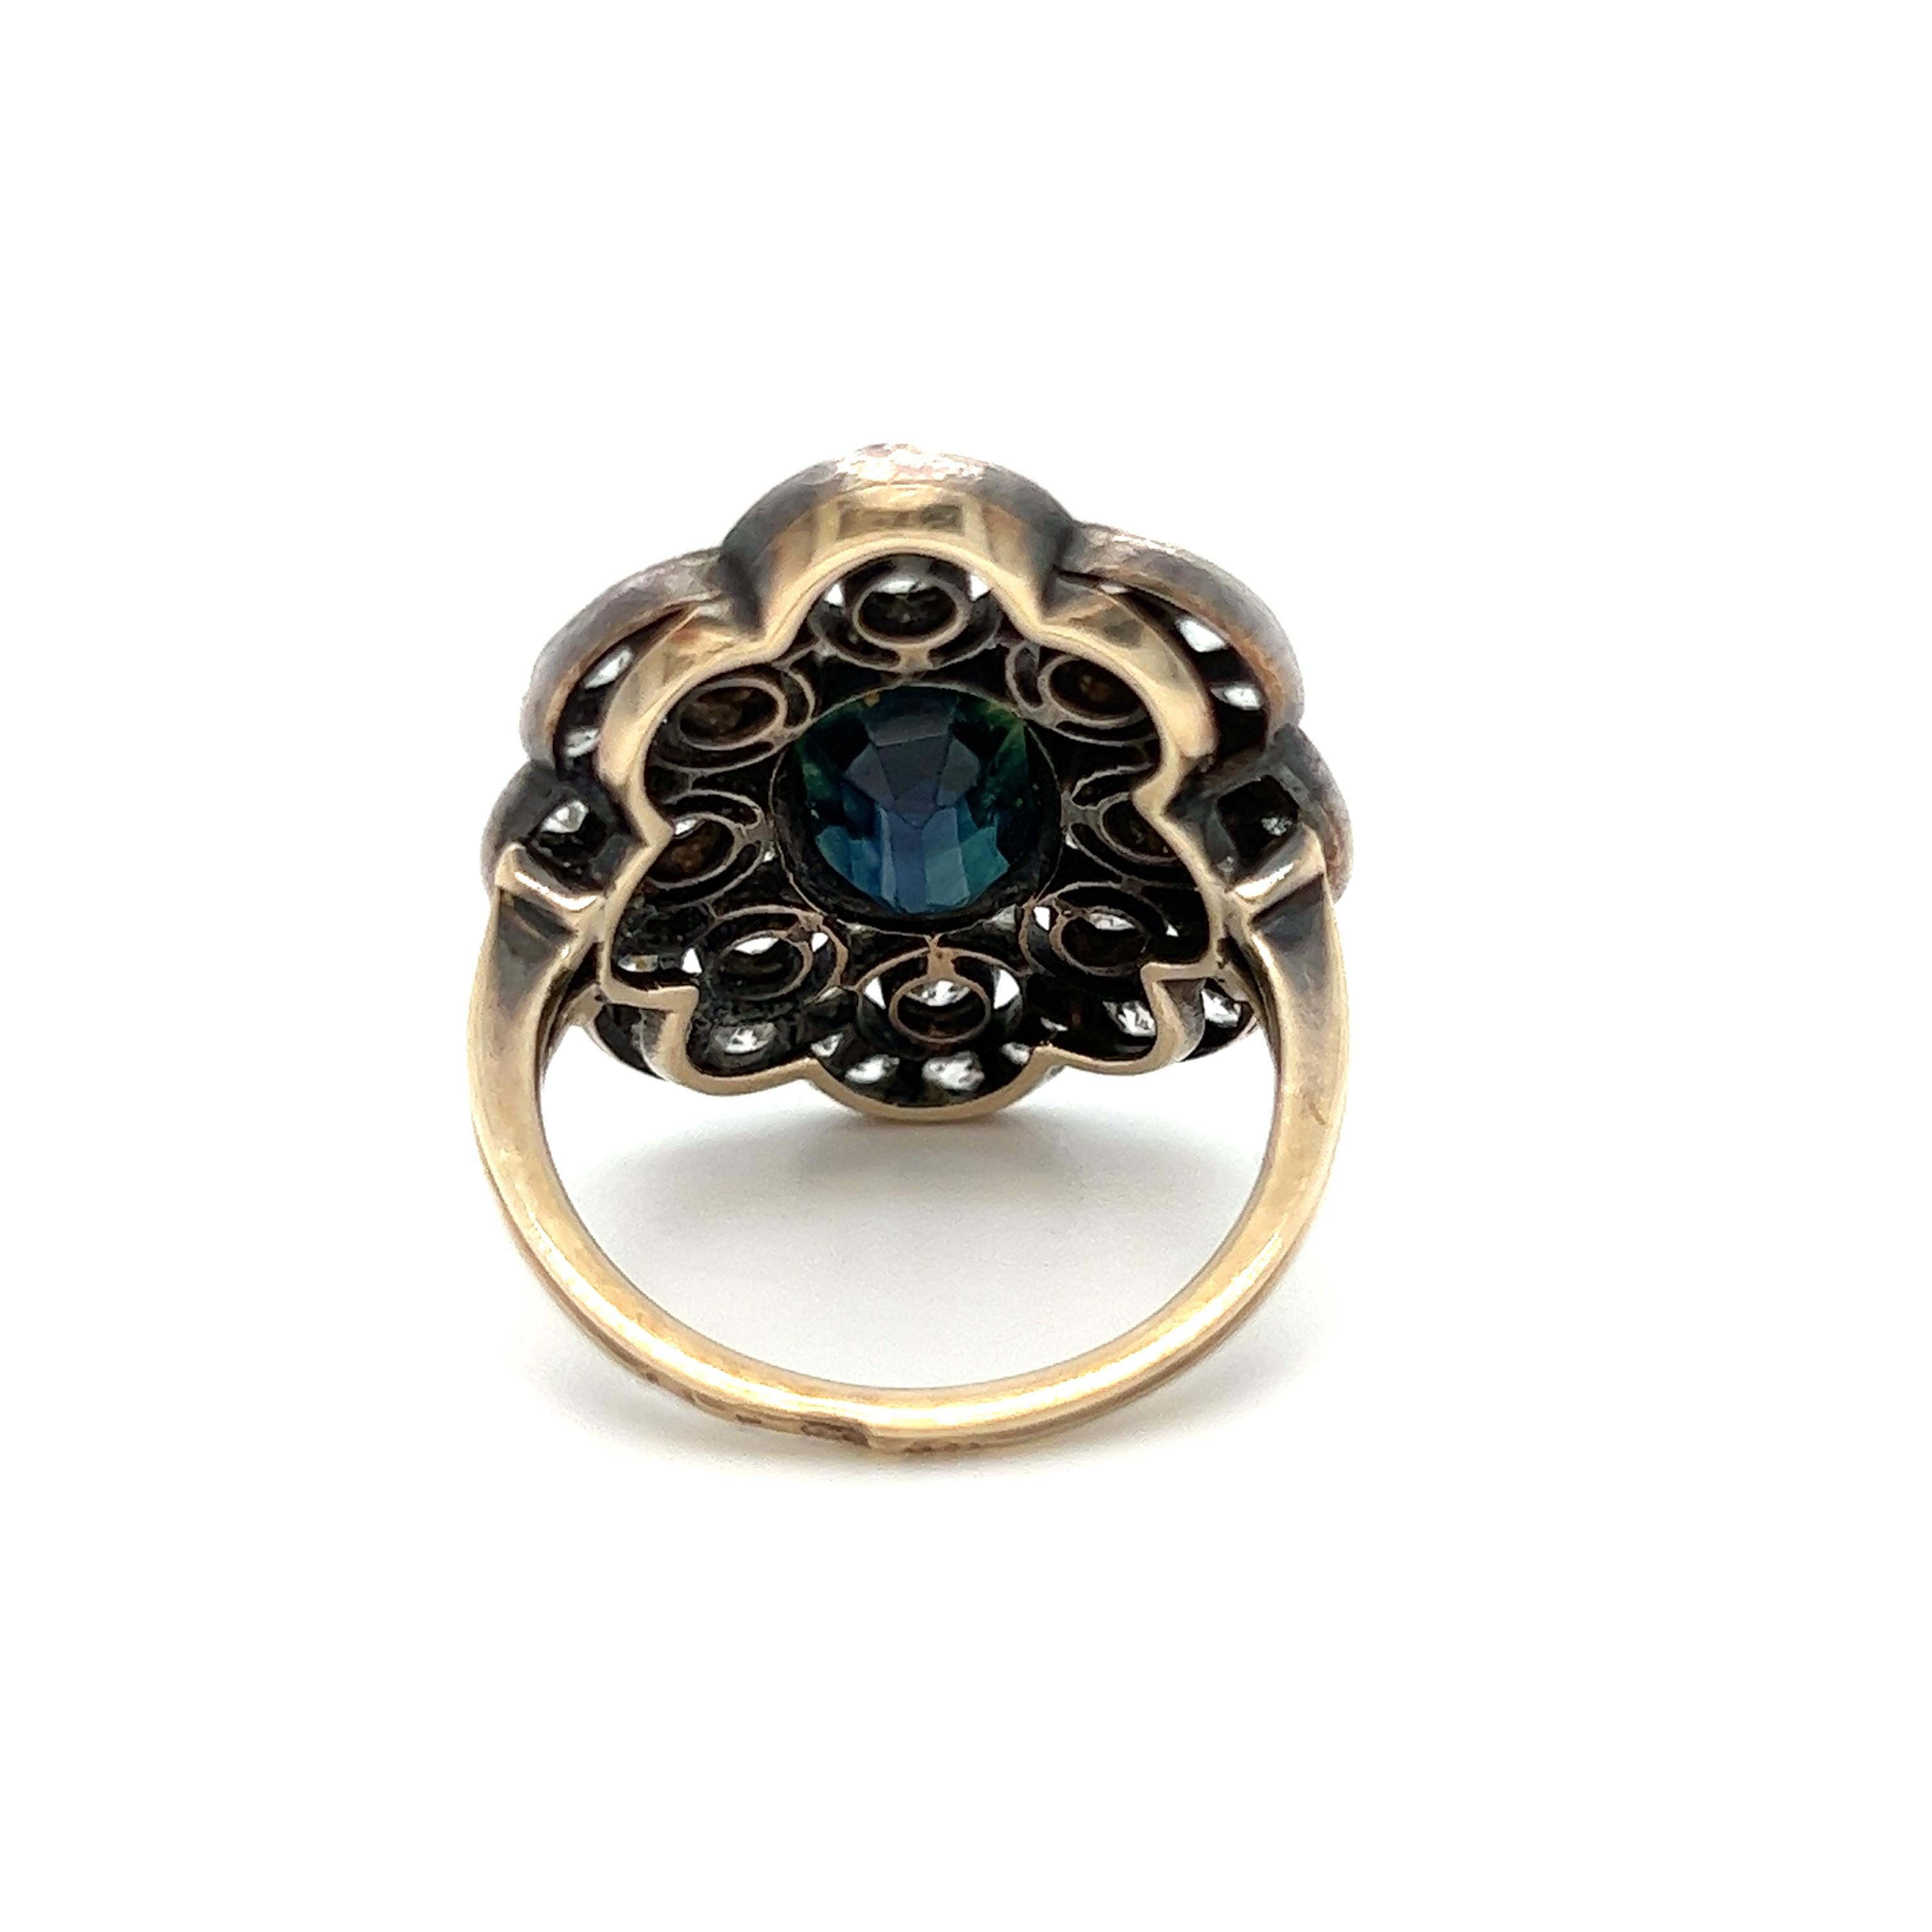 Antique Cushion Cut Gorgeous Antique Russian 14K Yellow Gold Diamond and Teal Sapphire Ring - 5.25ct For Sale